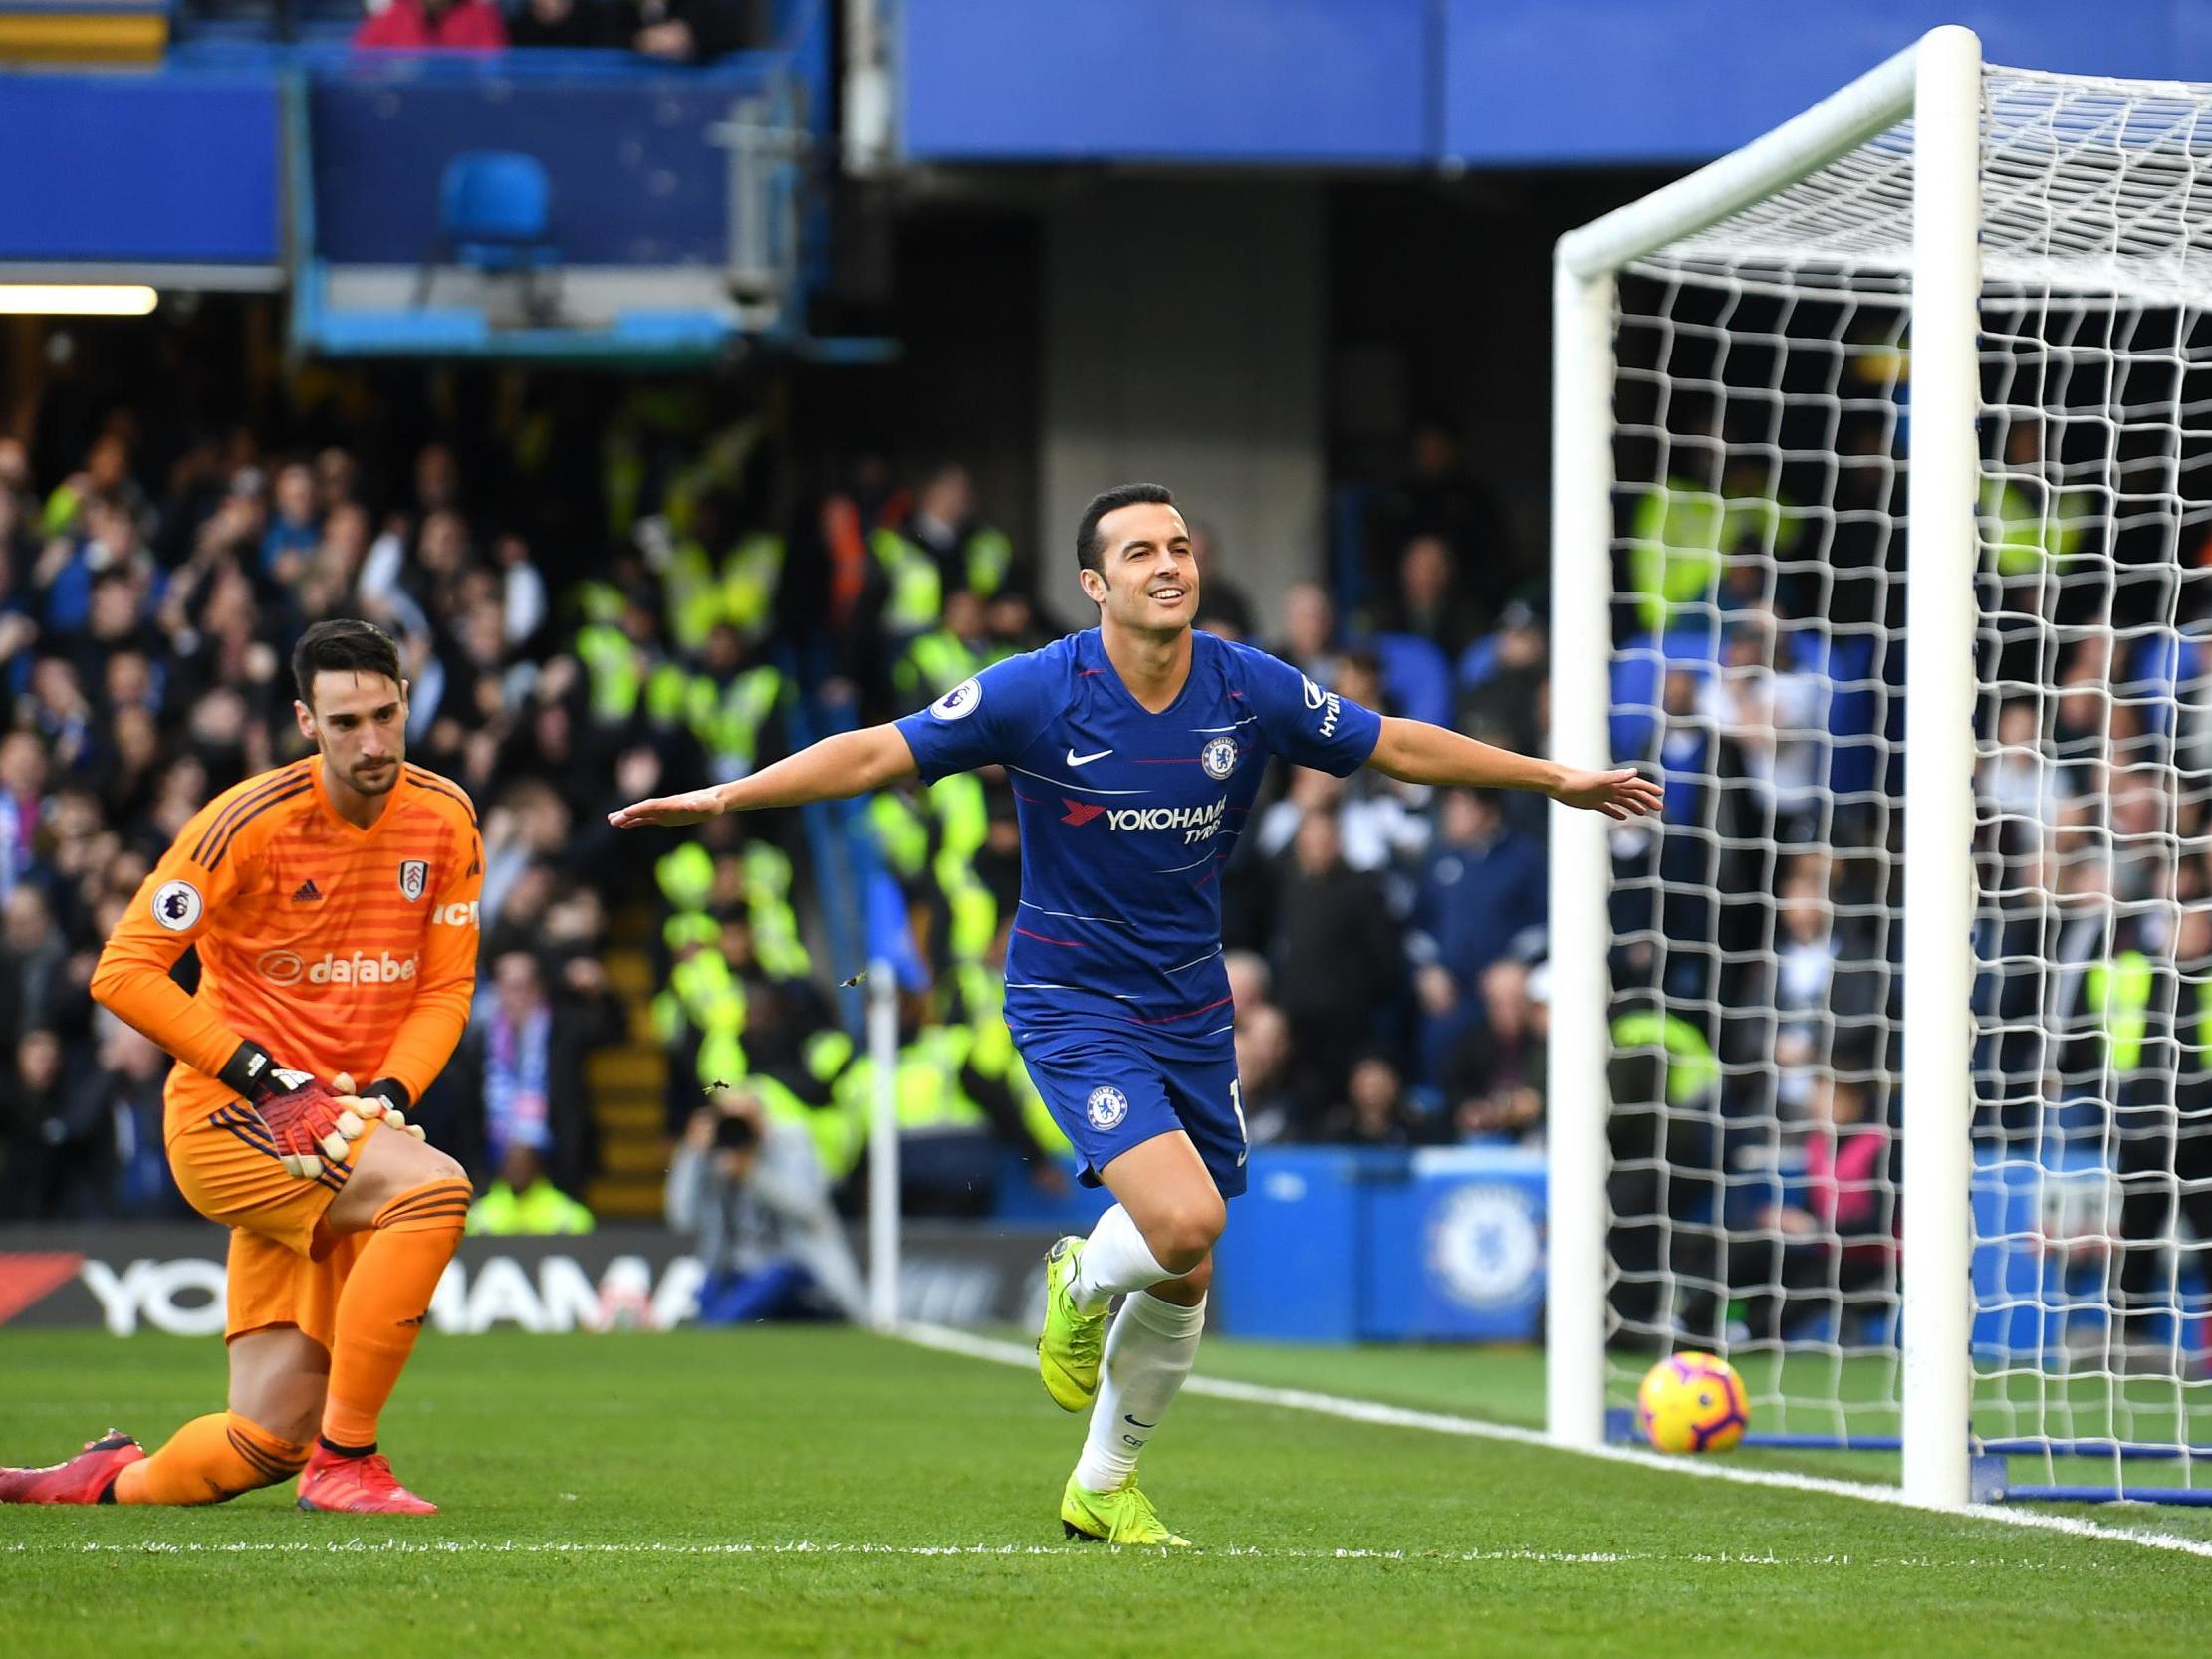 Pedro scored Chelsea’s first goal of the afternoon